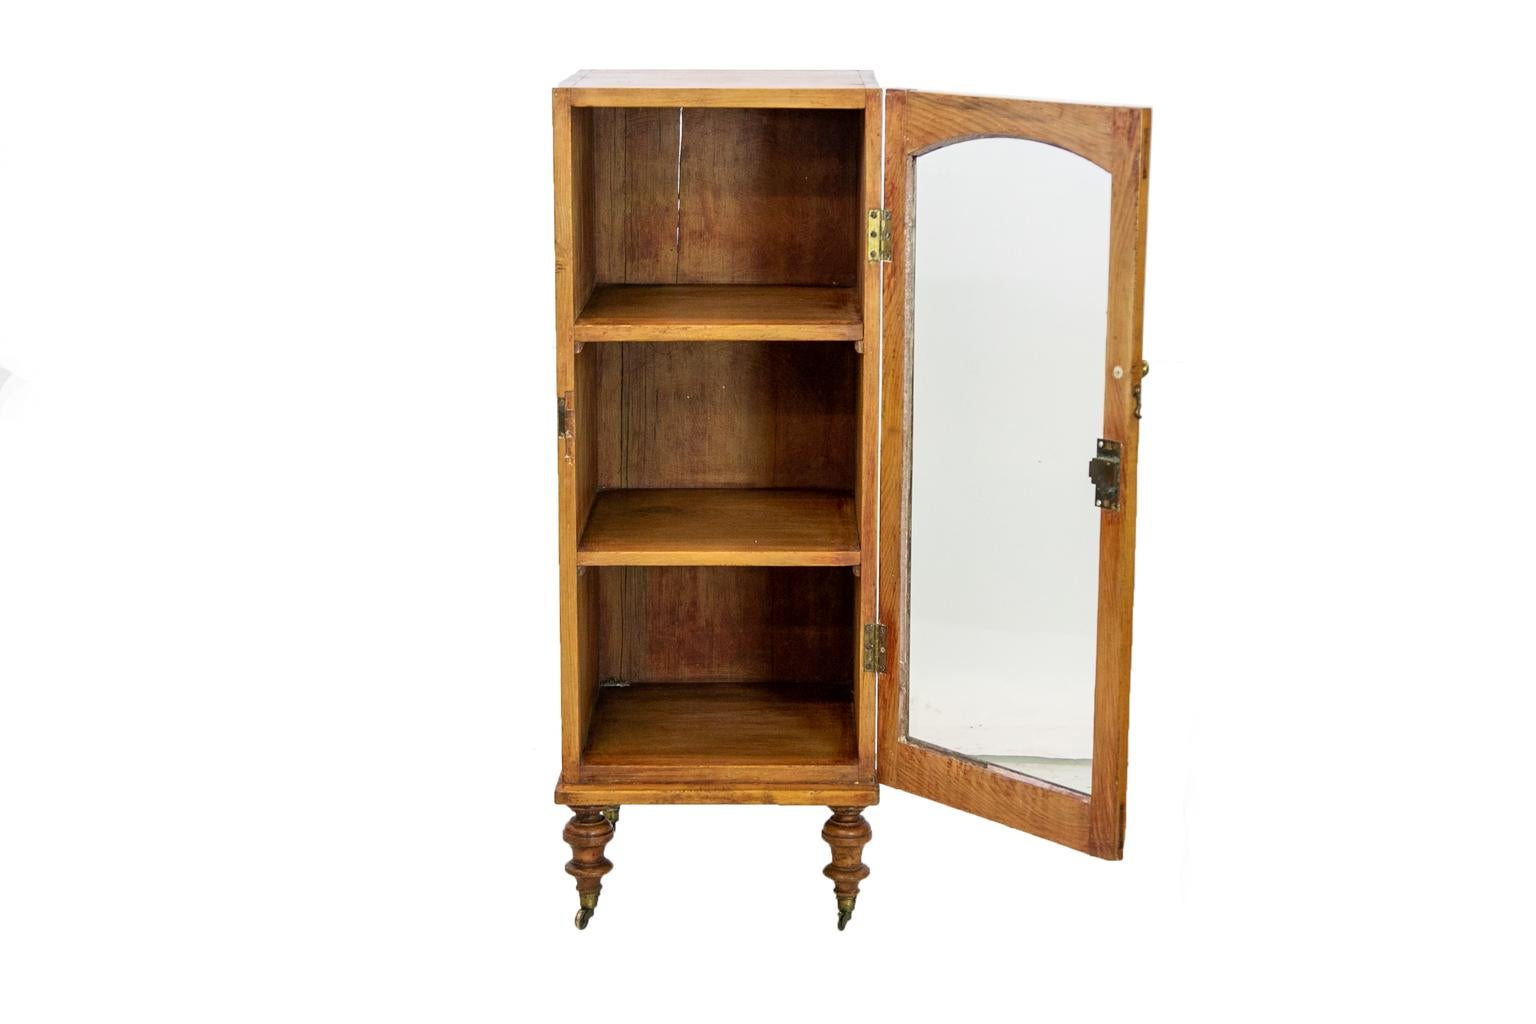 English pine glass door cupboard, the glass front is the original large wavy glass pane. The legs, castors, and hinges are also original. The door has an arched top as well as exposed mortise and tenon construction.
 